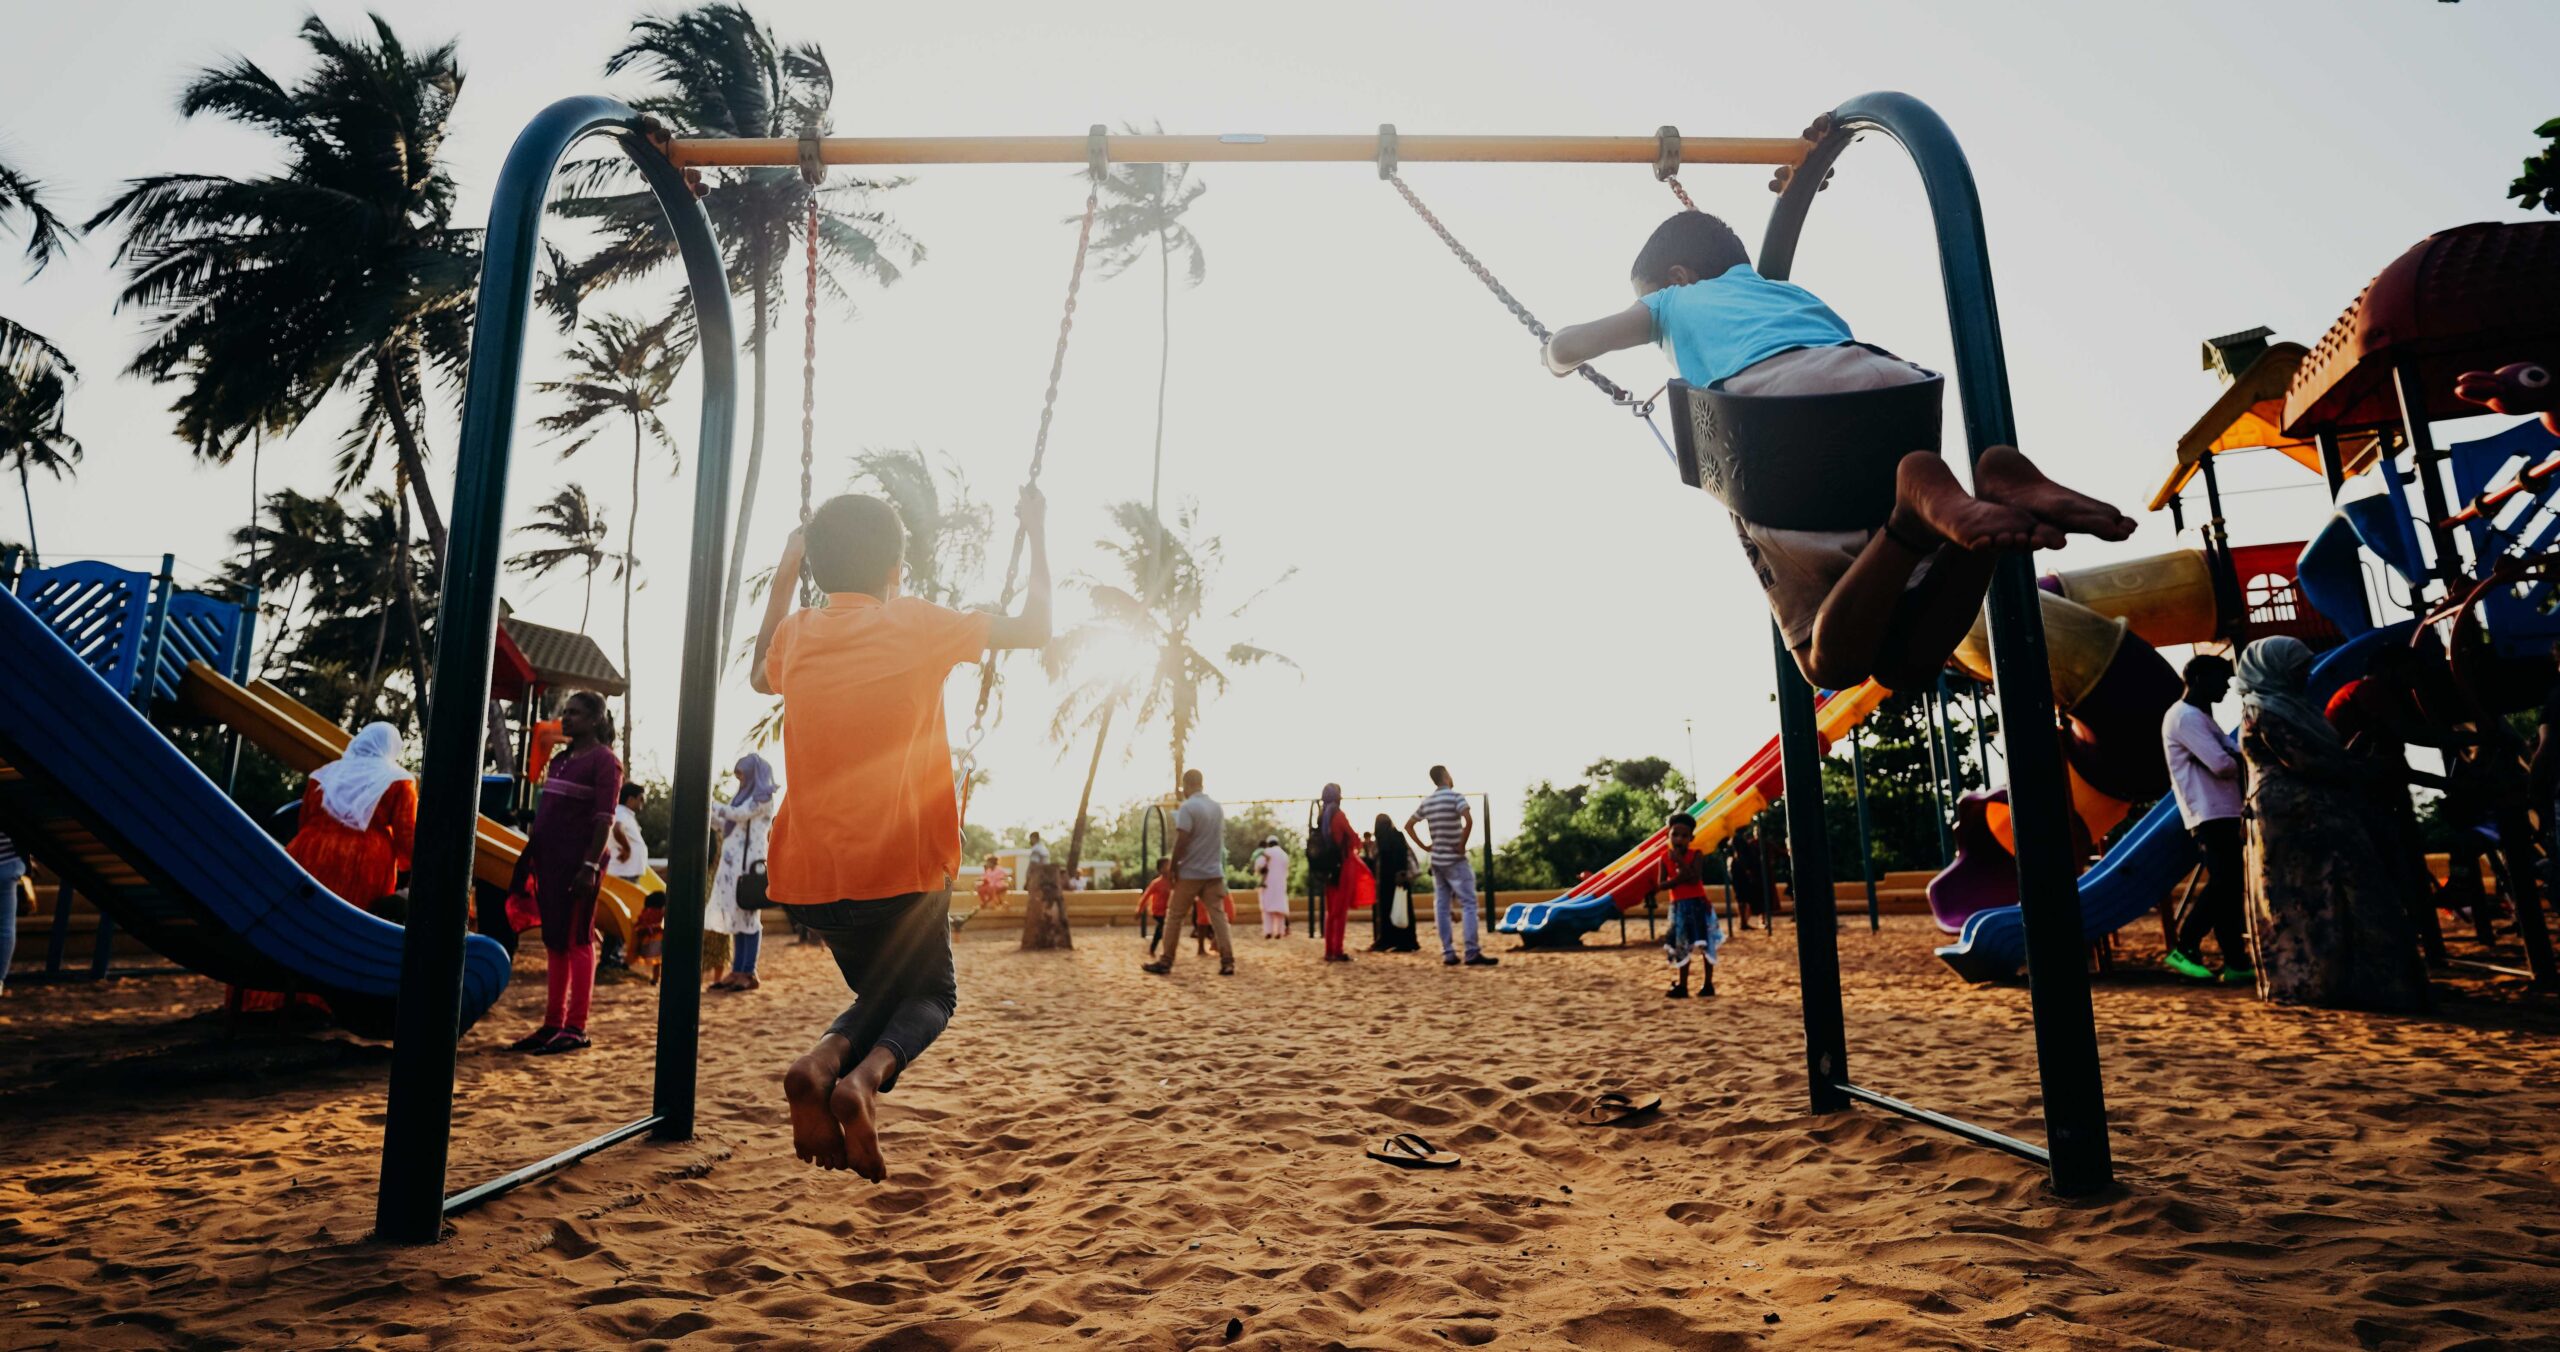 children on the swings in a play area